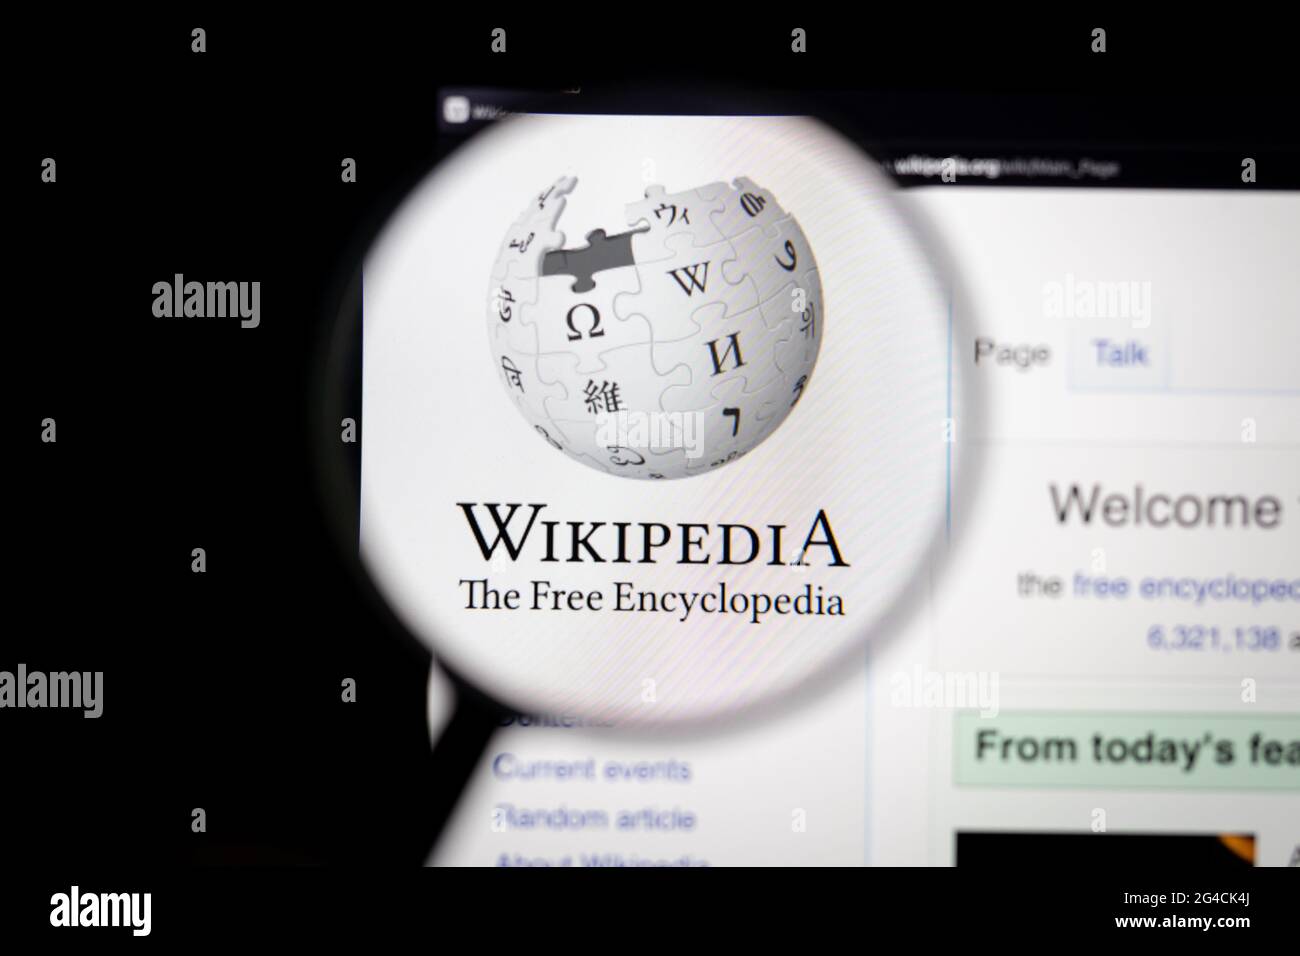 Wikipedia company logo on a website seen on a computer screen through a magnifying glass. Stock Photo